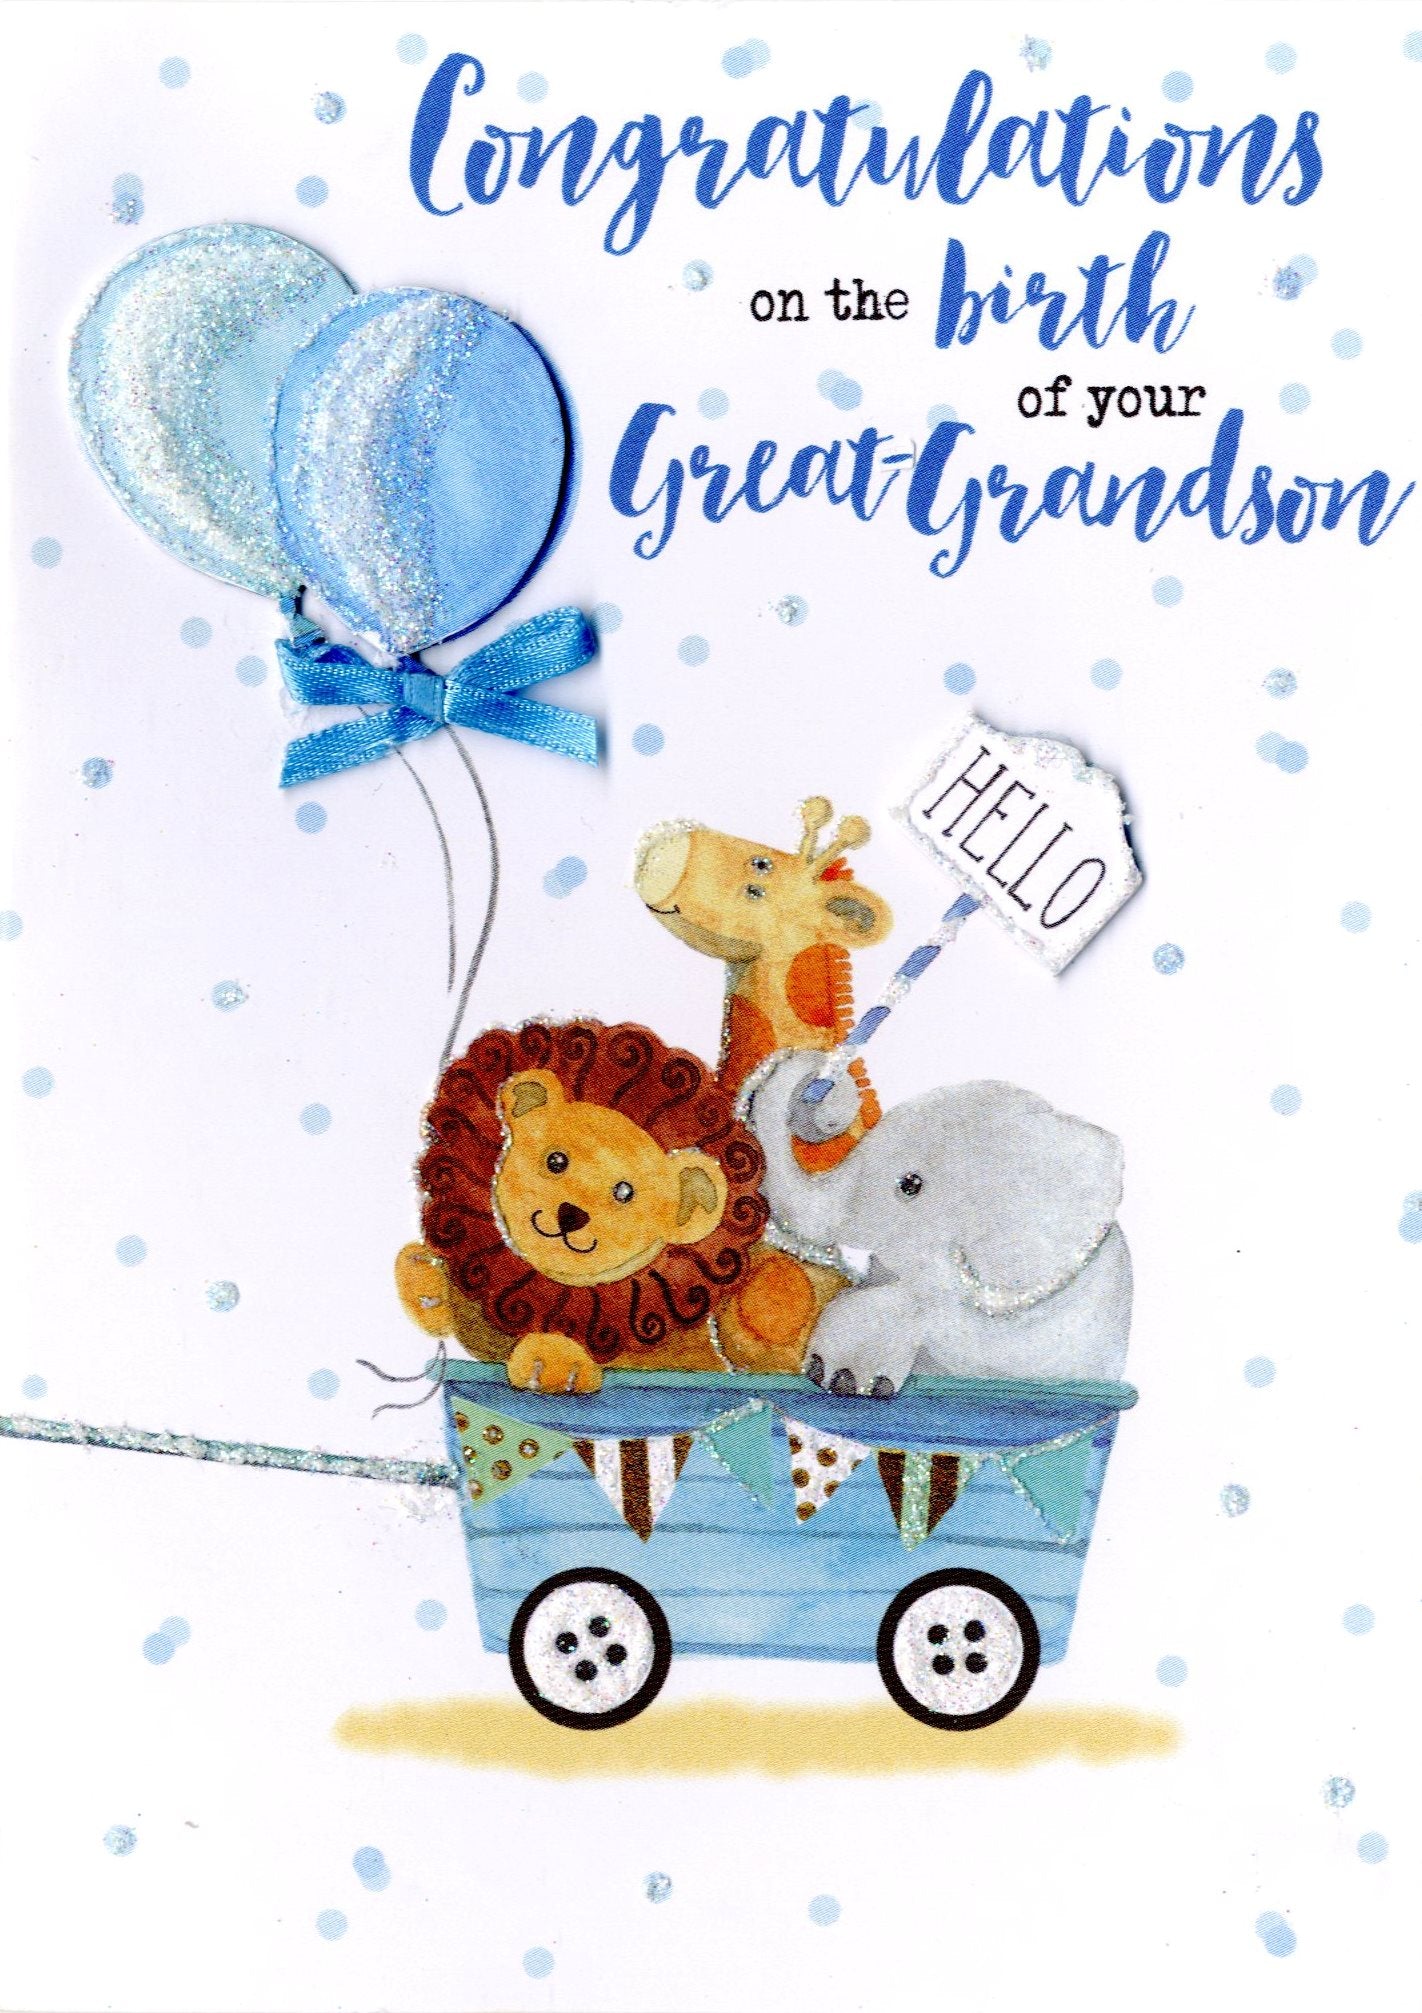 New Baby Great-Grandson Greeting Card